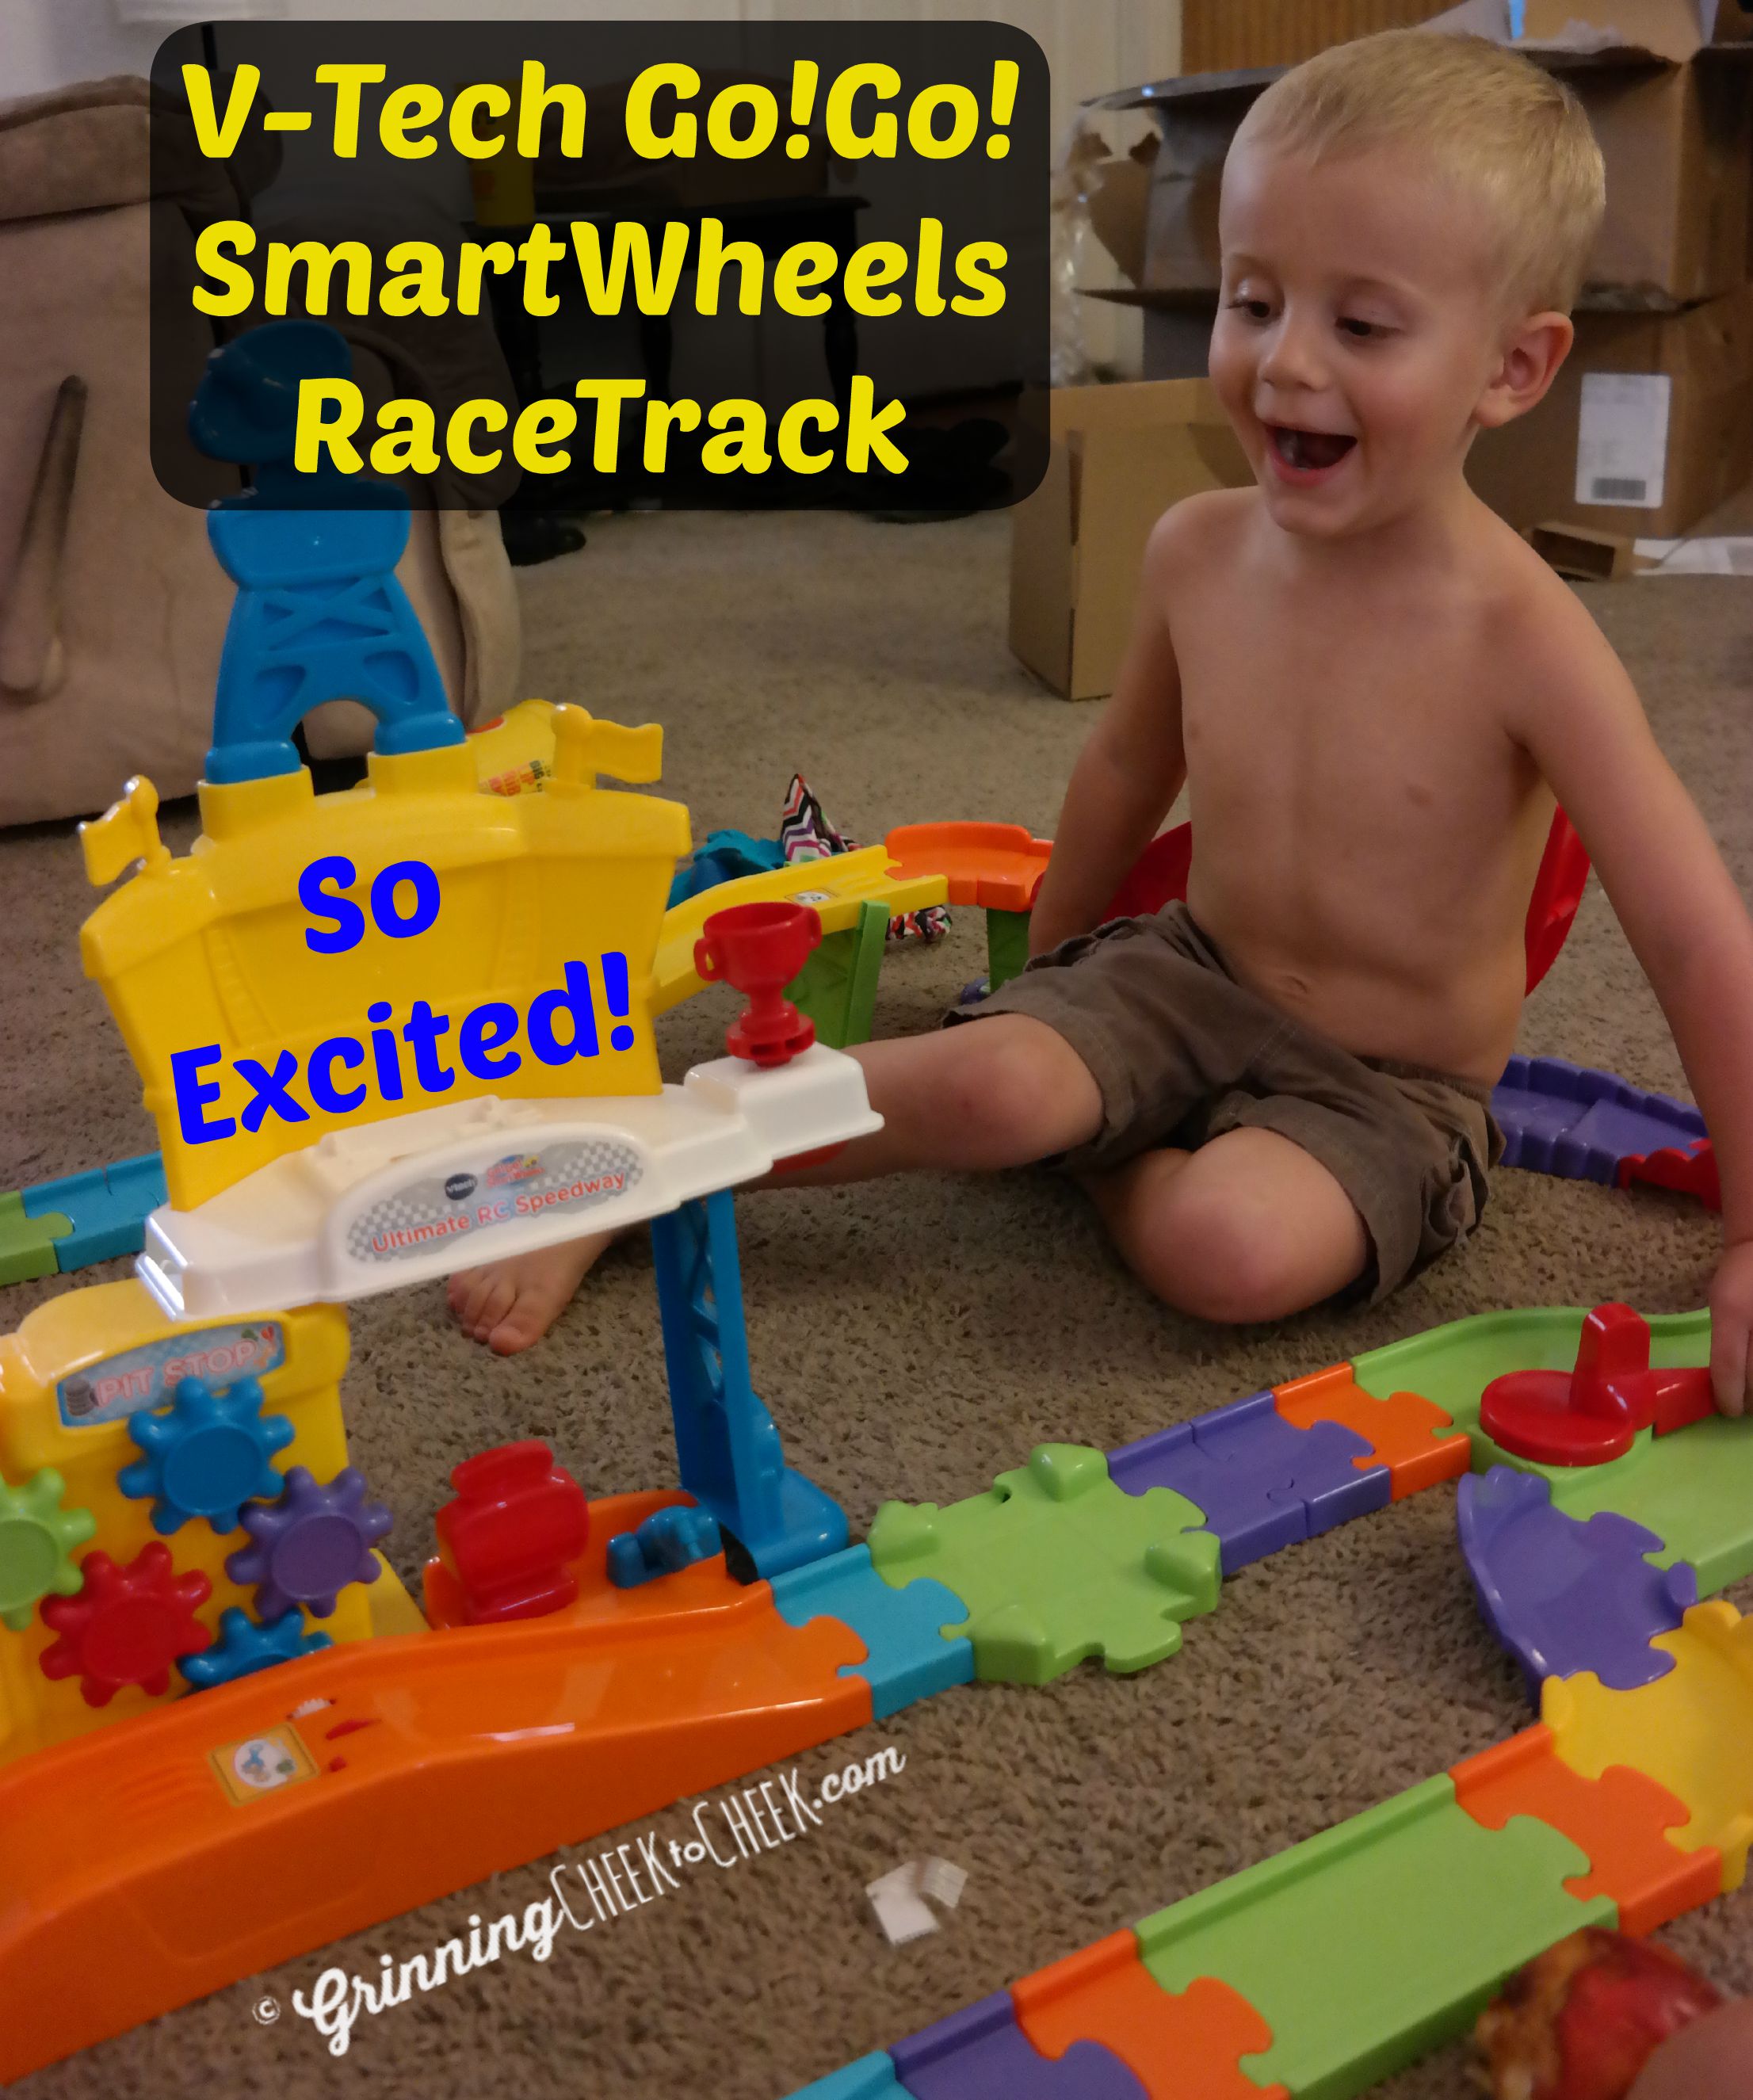 RC Car and Track for little Ones! #VTECHKids